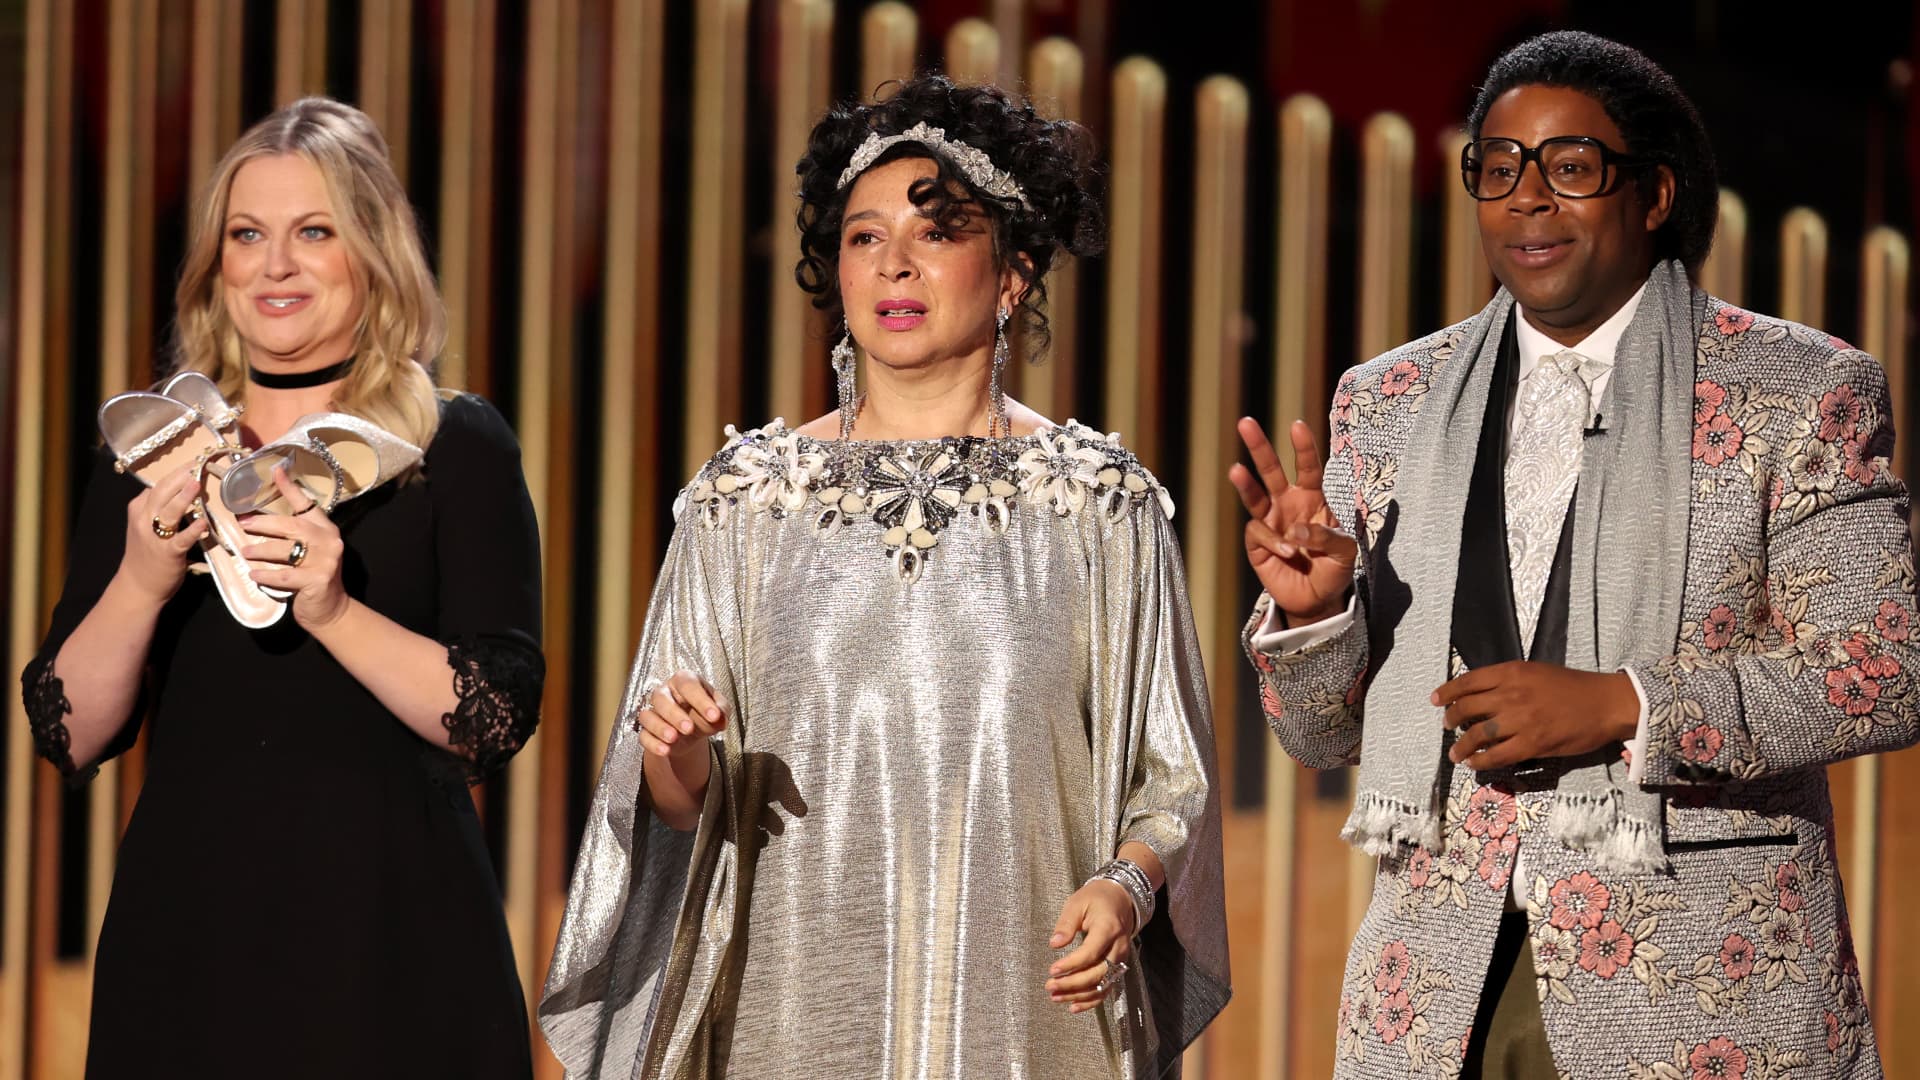 Pictured: (l-r) Amy Poehler, Maya Rudolph, and Kenan Thompson speak onstage at the 78th Annual Golden Globe Awards held at The Beverly Hilton and broadcast on February 28, 2021 in Beverly Hills, California.